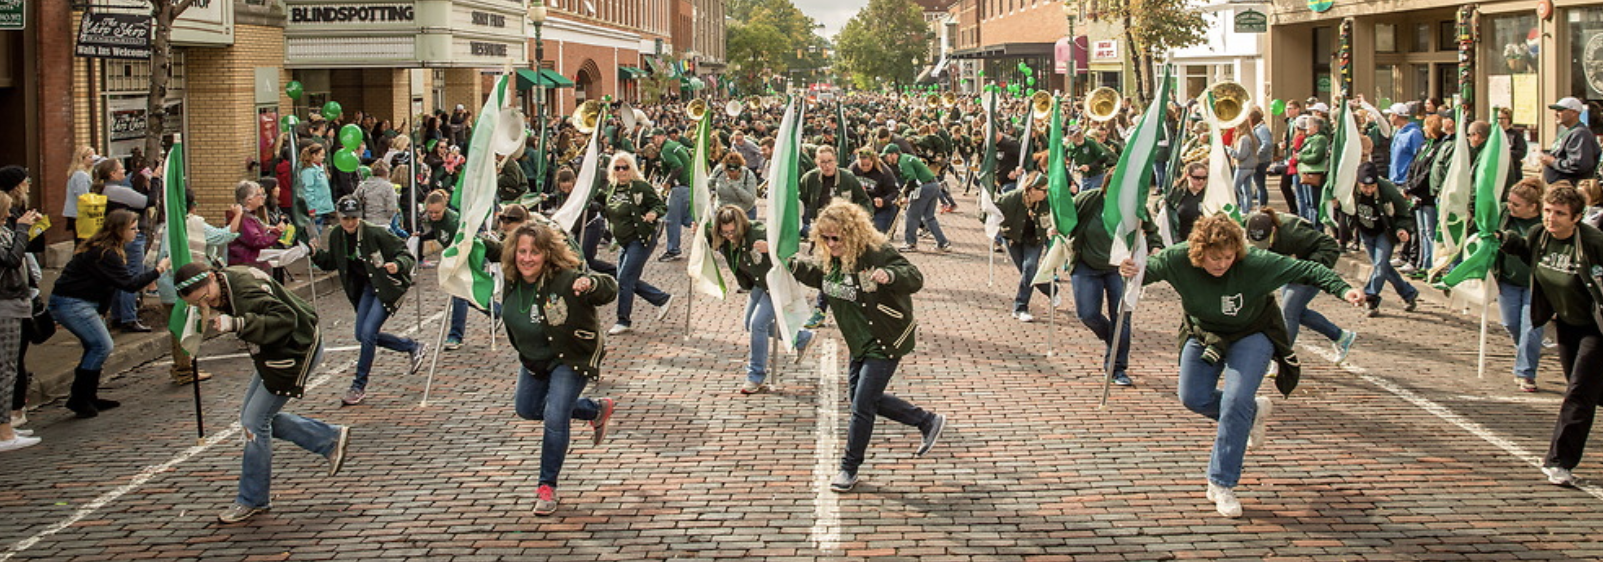 Marching 110 alumni performing in the Homecoming parade